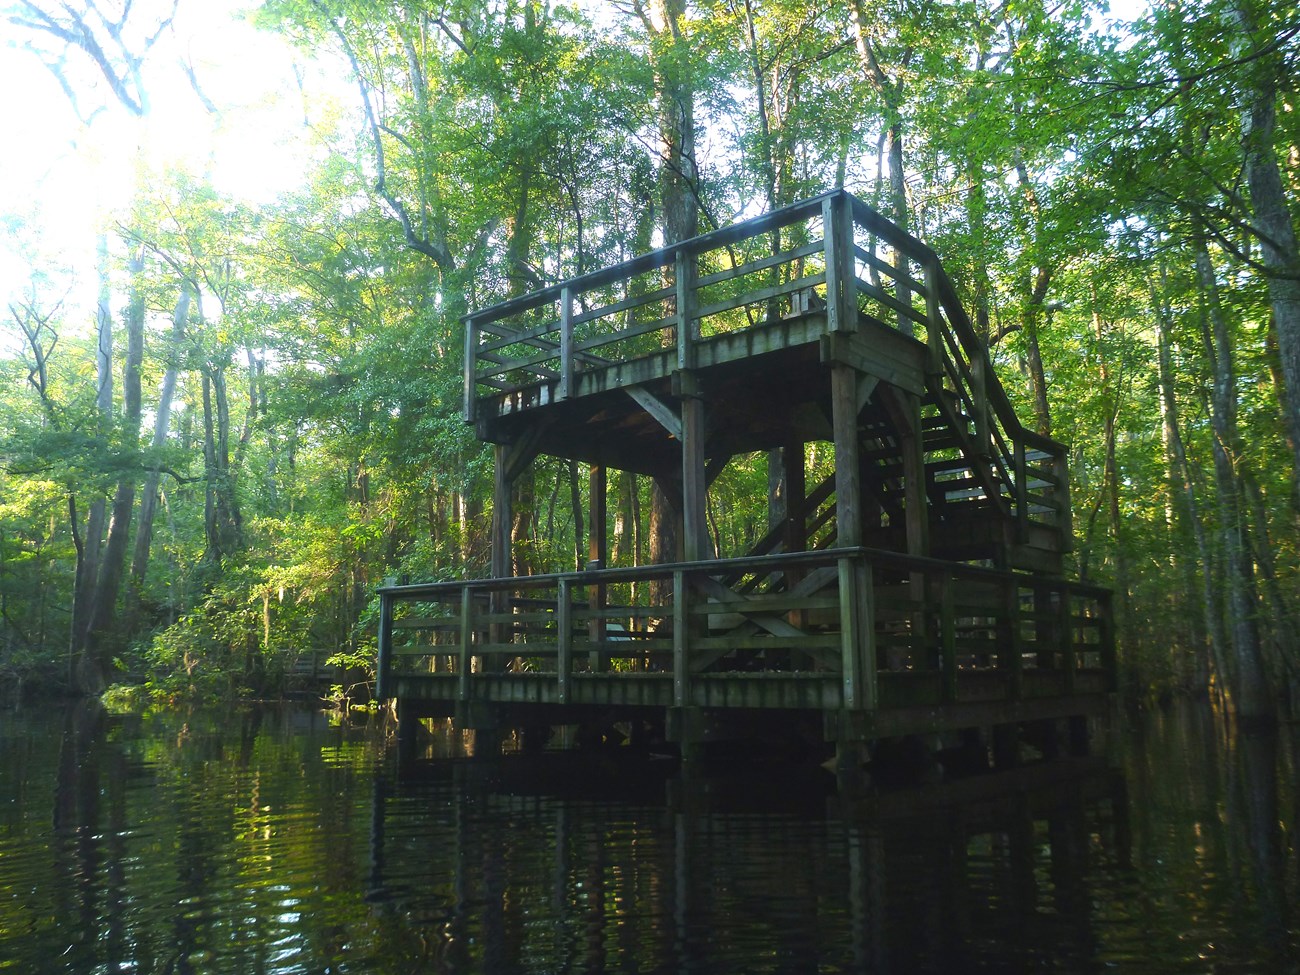 A fenced in, wooden platform sits above a boardwalk in a nest of trees.